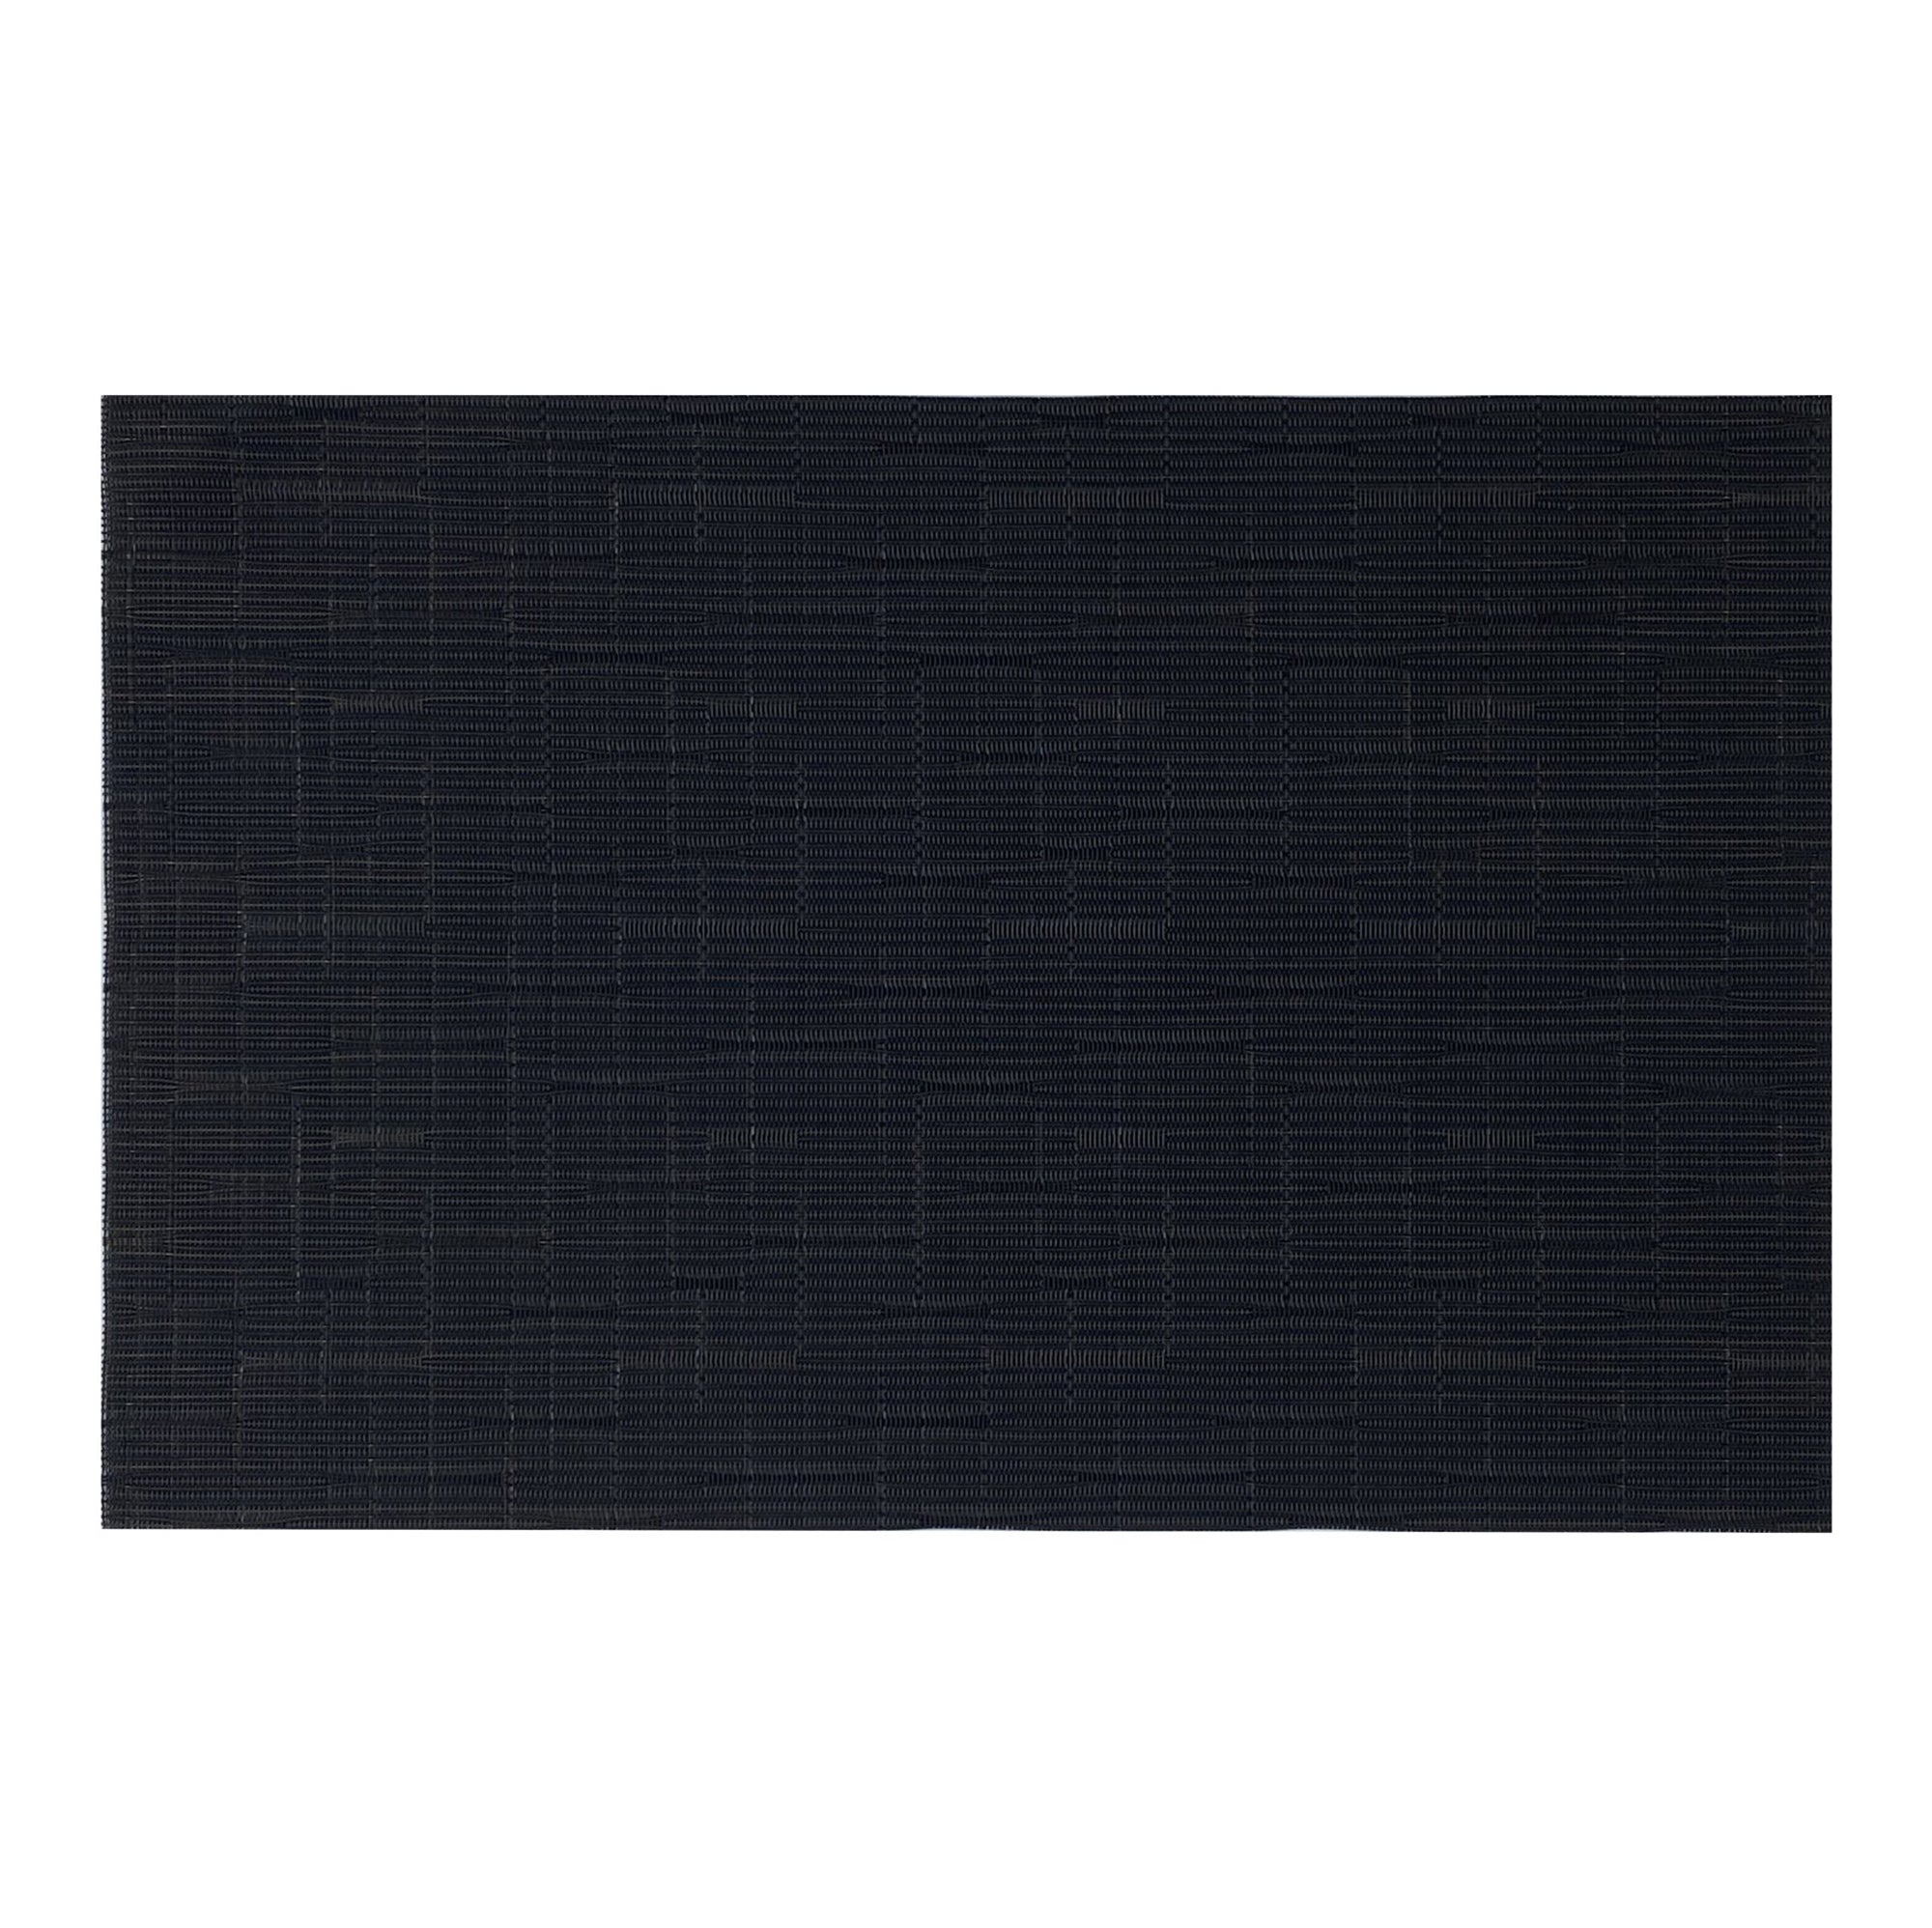 Black Textaline Placemat 17.5x12in